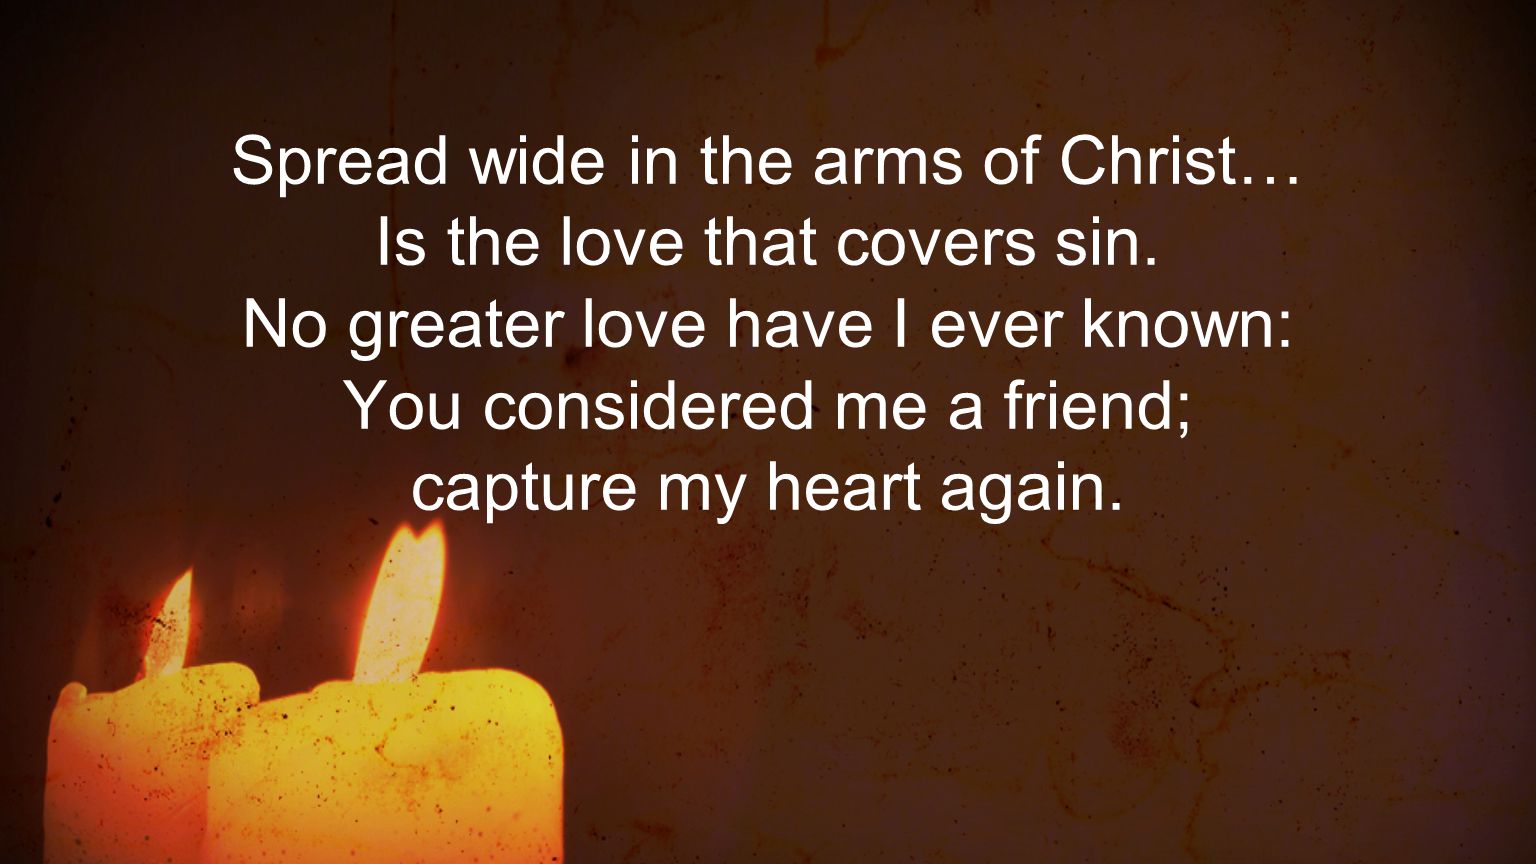 Spread wide in the arms of Christ… Is the love that covers sin.